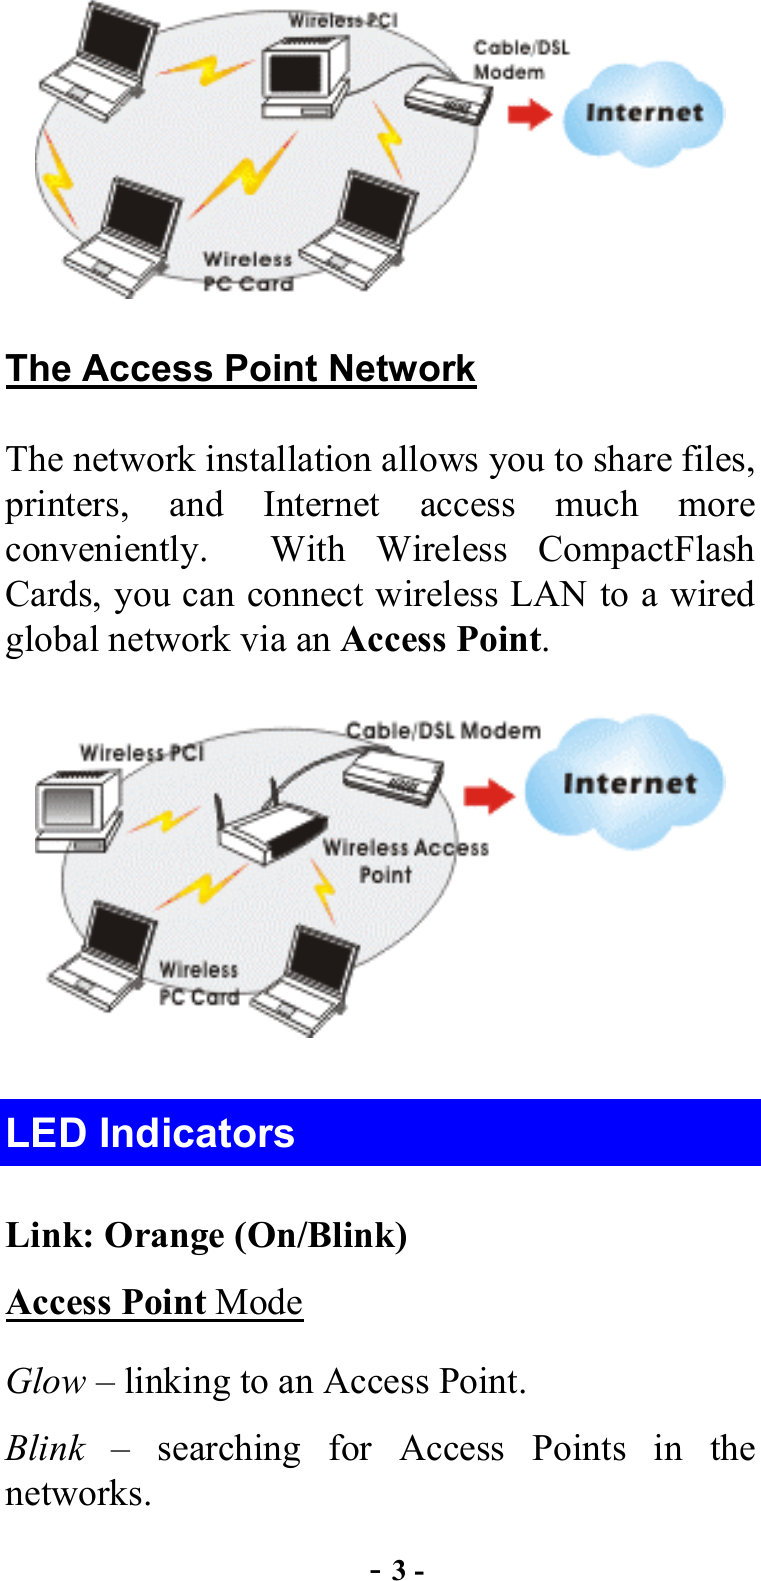  - 3 -  The Access Point Network The network installation allows you to share files, printers, and Internet access much more conveniently.  With Wireless CompactFlash Cards, you can connect wireless LAN to a wired global network via an Access Point.    LED Indicators Link: Orange (On/Blink) Access Point Mode Glow – linking to an Access Point. Blink – searching for Access Points in the networks. 